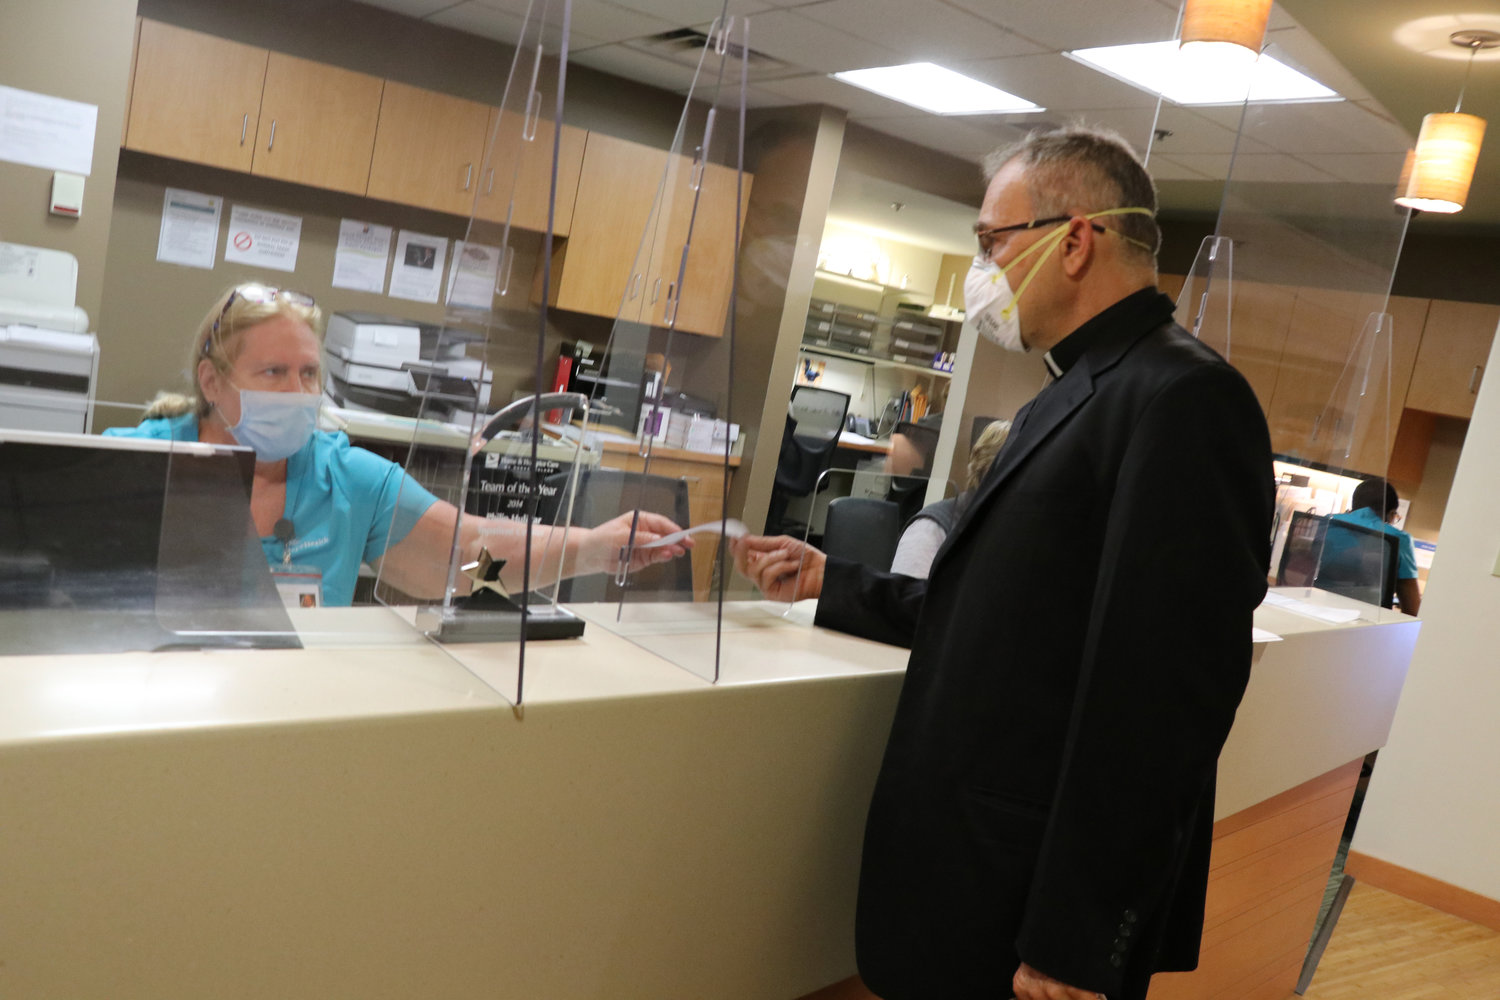 Father Albert Ranallo, coordinator for Pastoral Care for Health Facilities in the Diocese of Providence, gets an update on the status of patients he is there to provide the Sacrament of the Sick to.